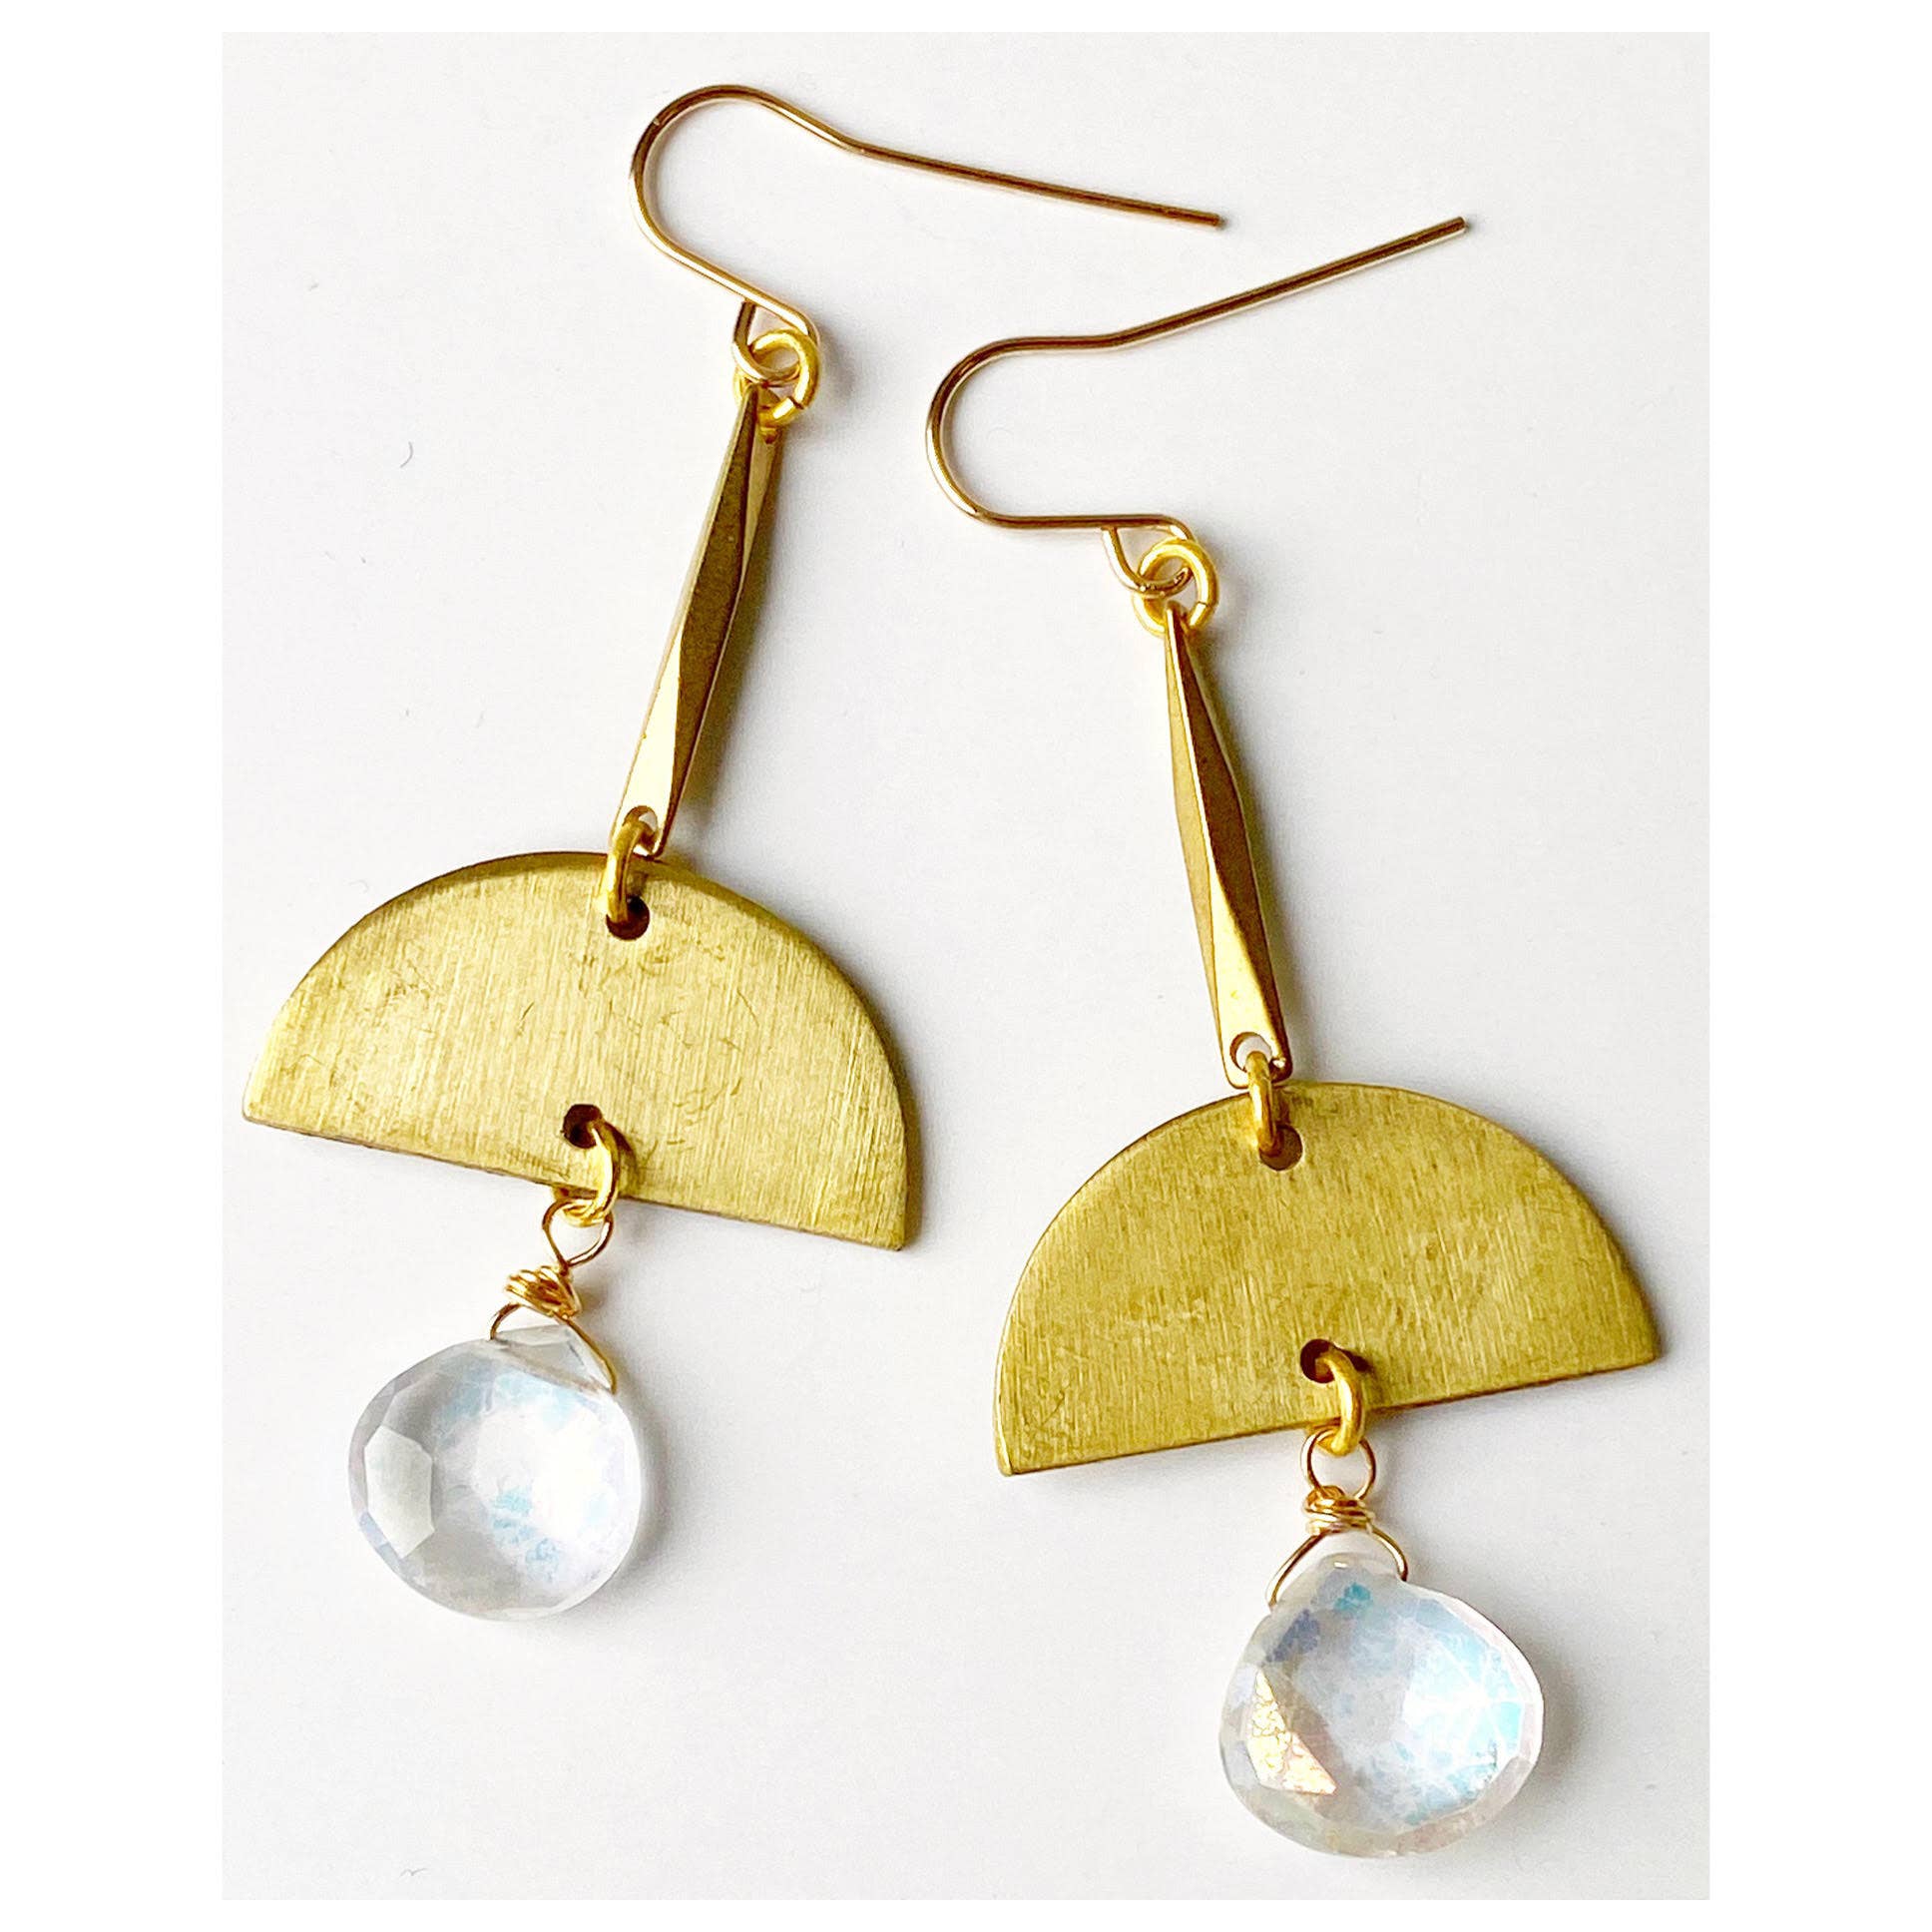 Chic bohemian gold earrings unique model woven with small faceted blue topazes and golden pearls on gold filled 14k